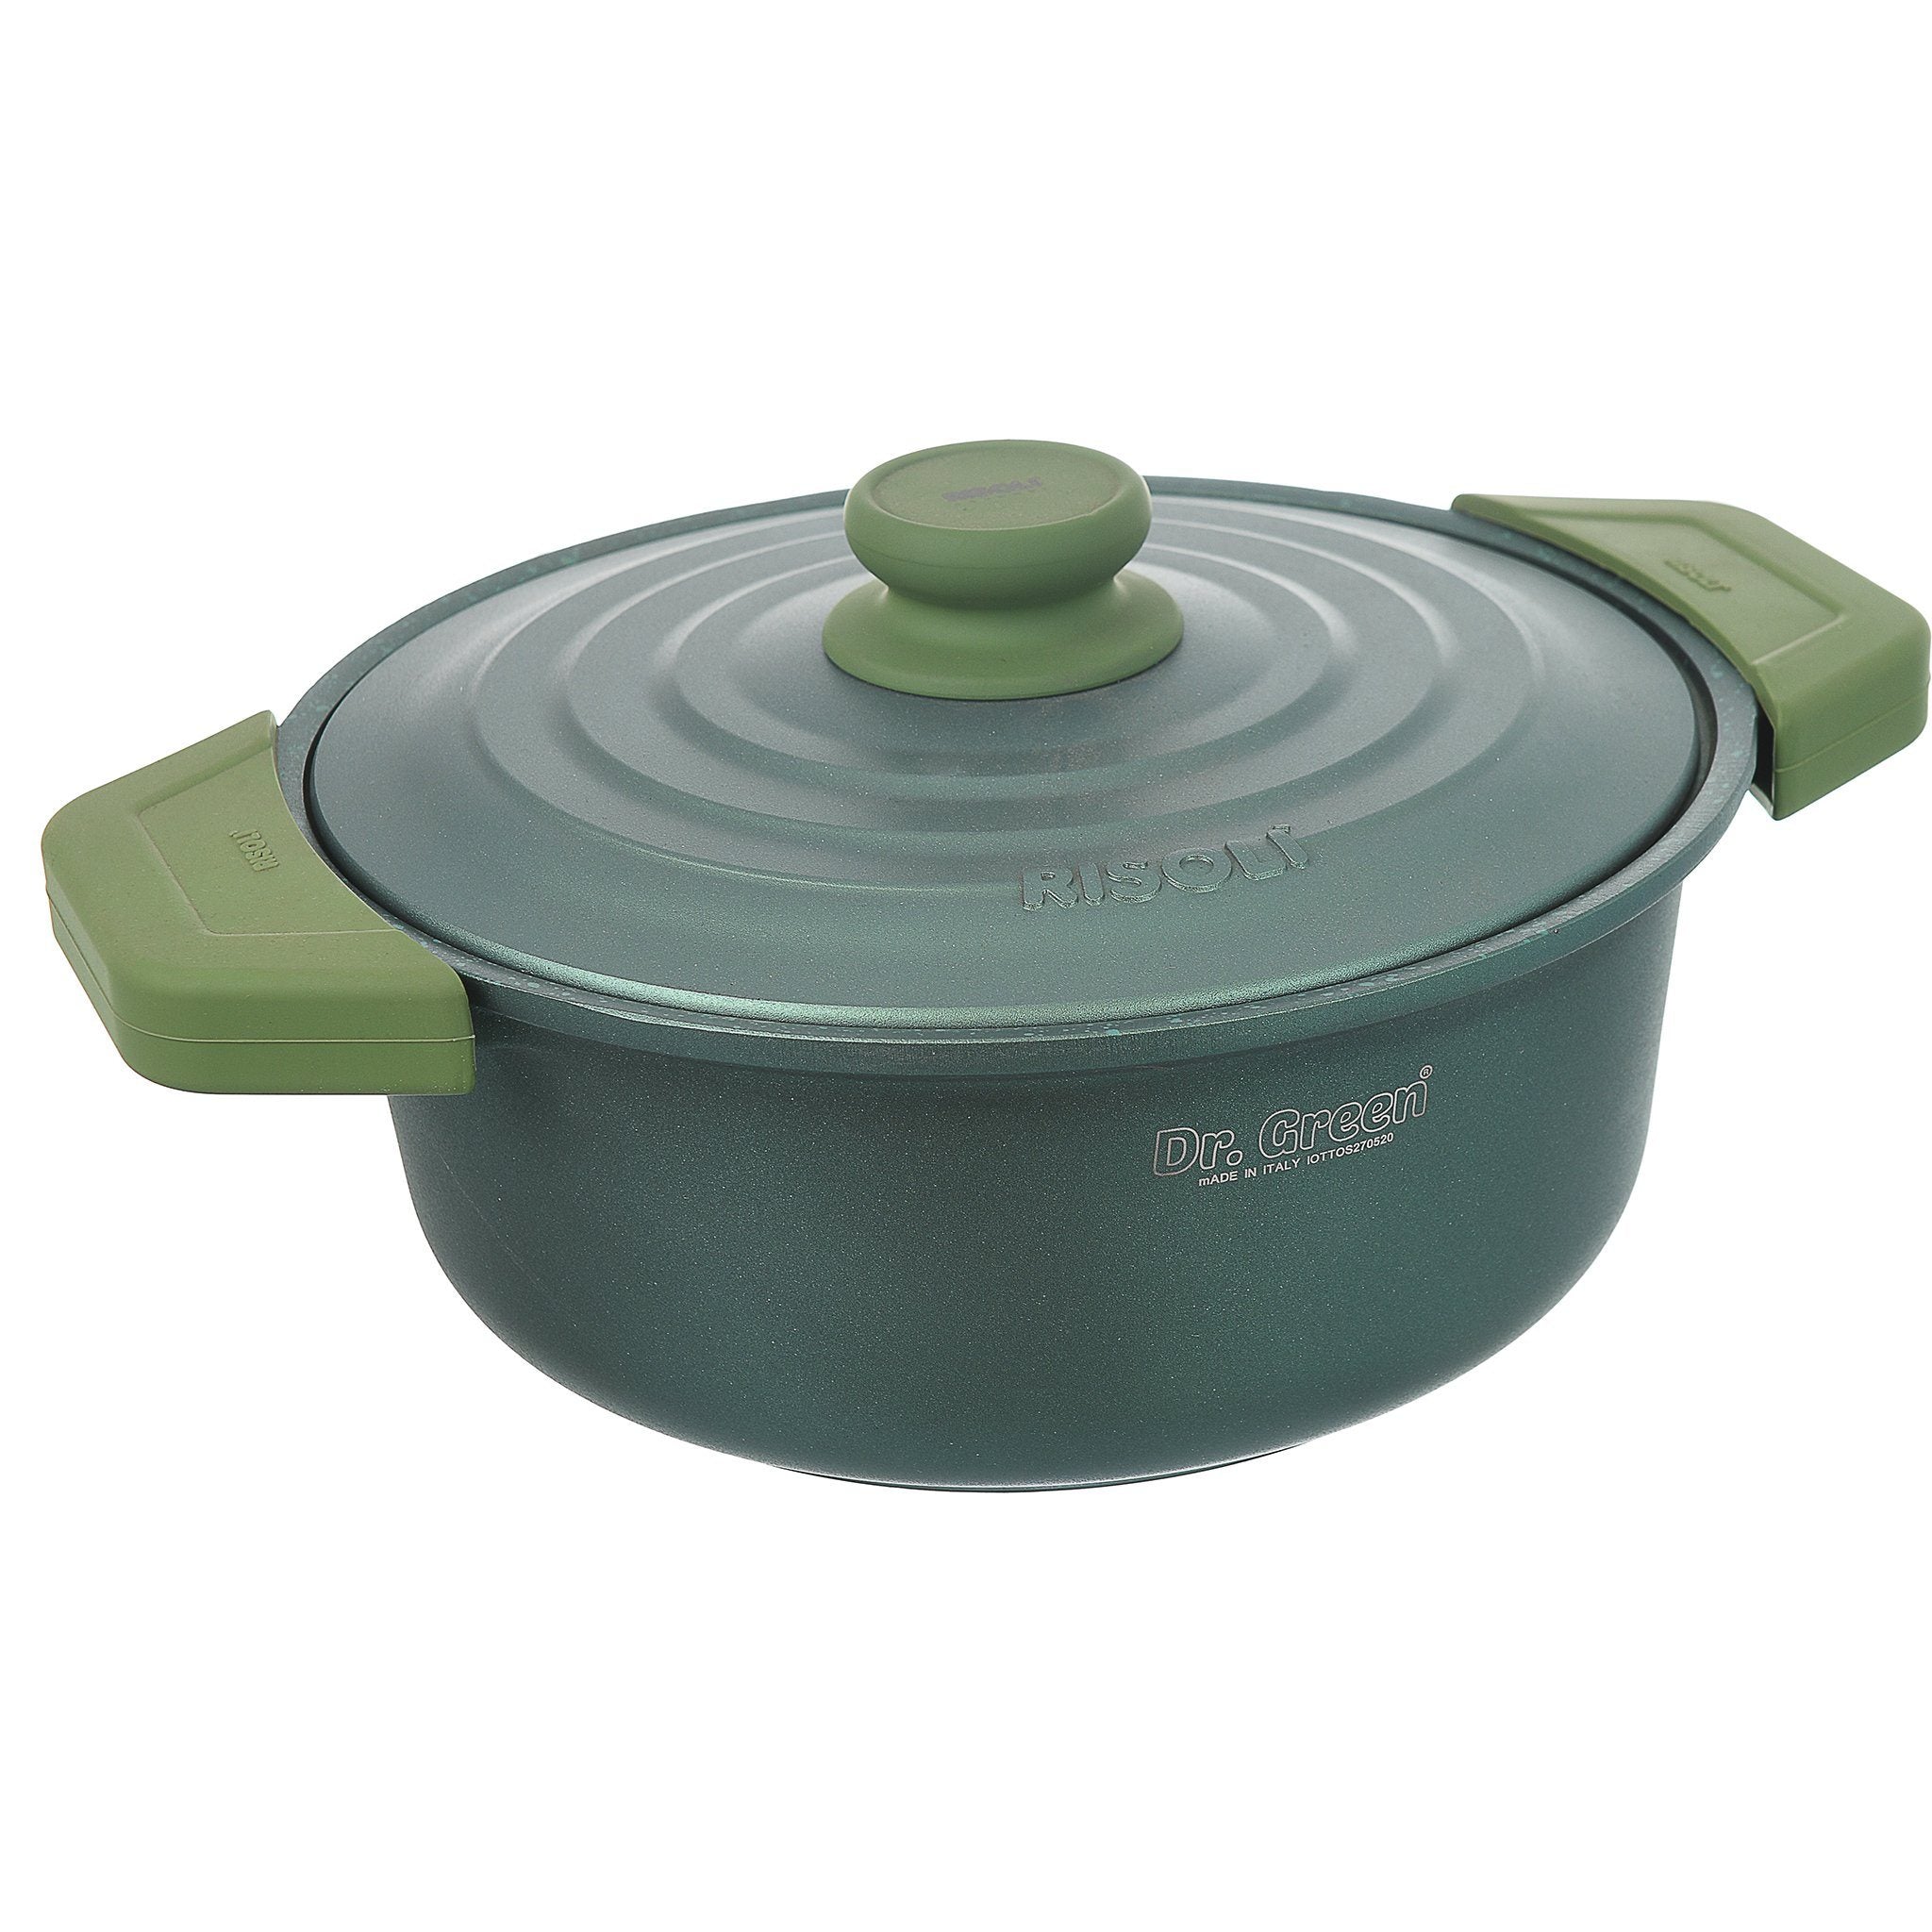 Risoli - Dr. Green Pot with Silicone Detachable Handles - Green - Die Cast Aluminum - 28cm - 44000341